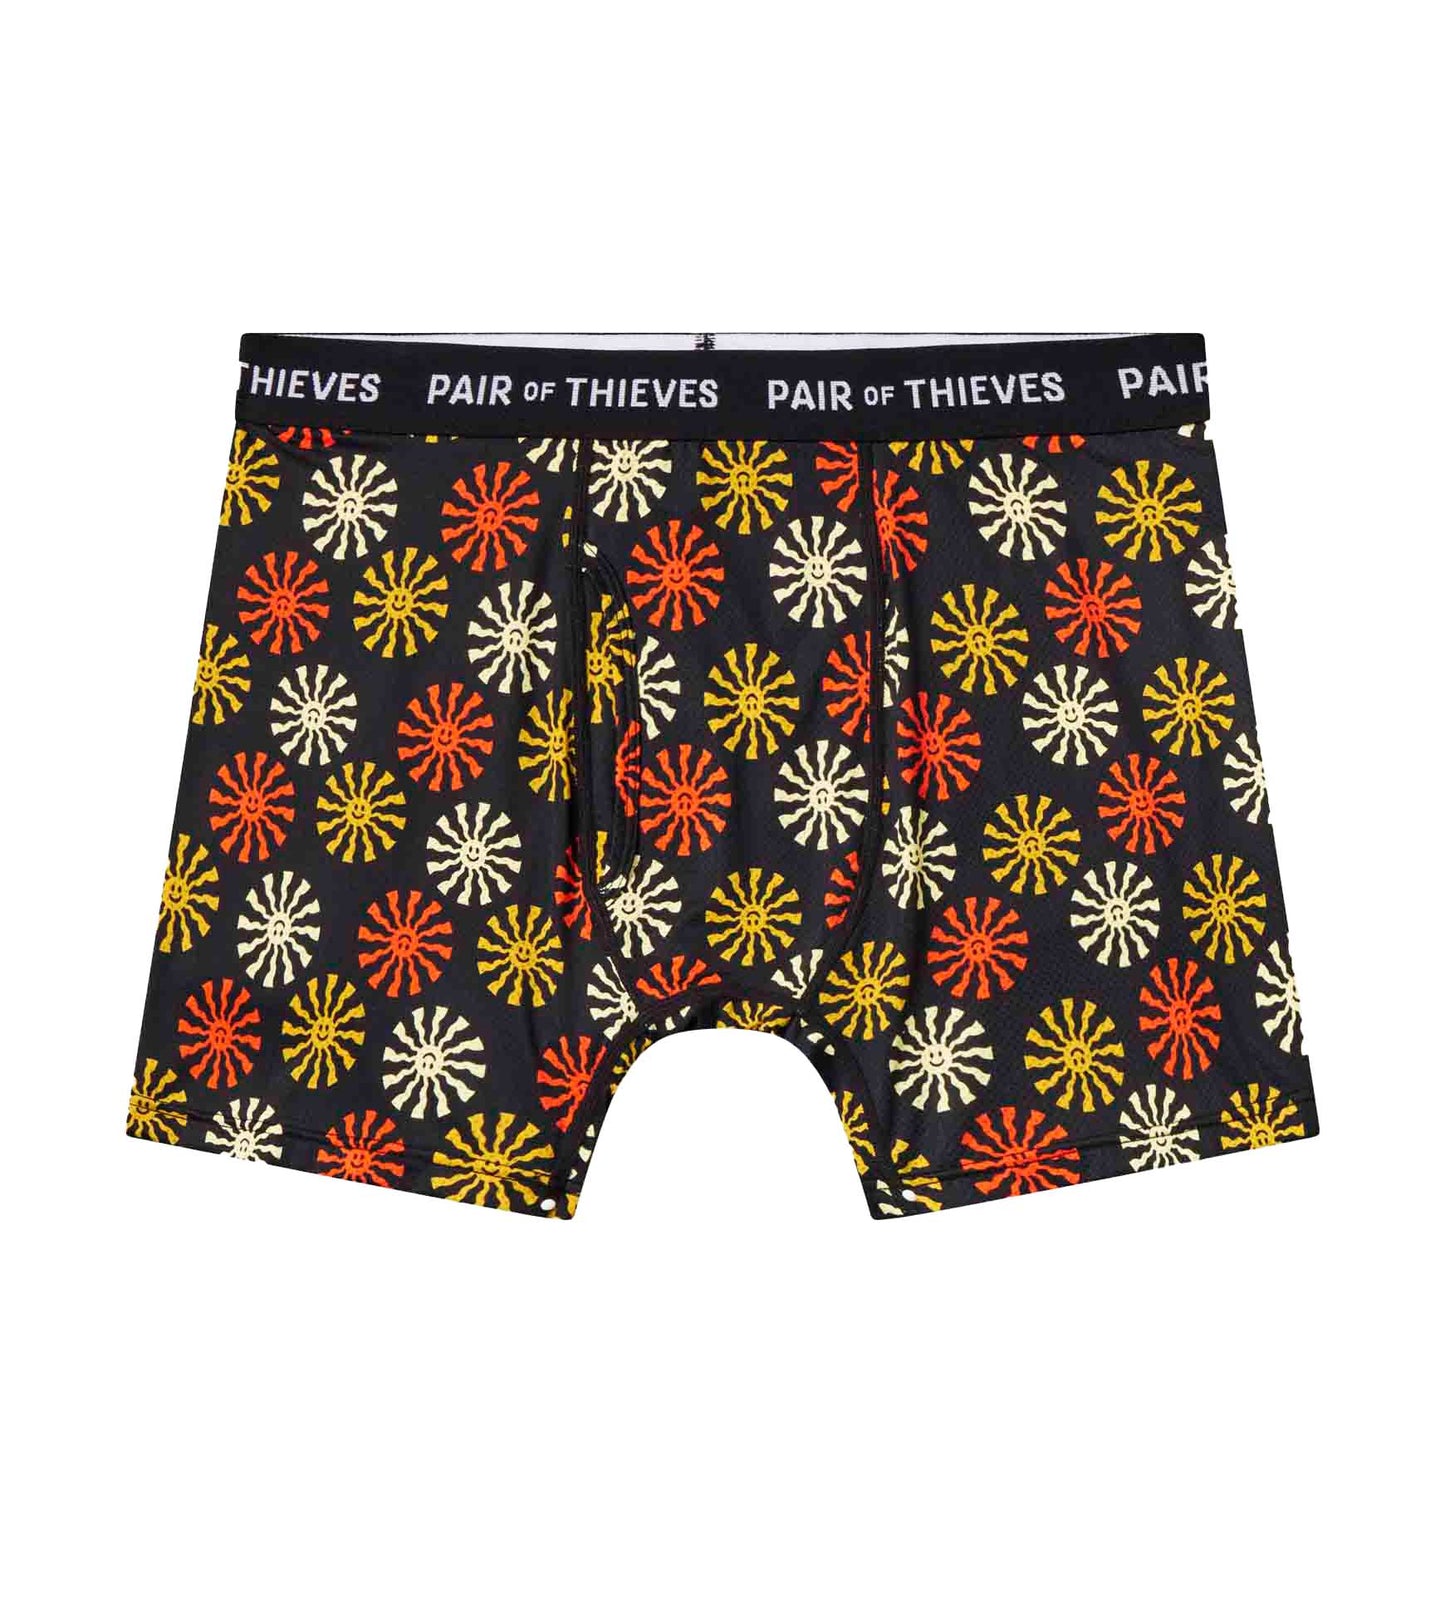 Pair of Thieves Mens 4 Pack Boxer Briefs - Everyday Kit Multipack